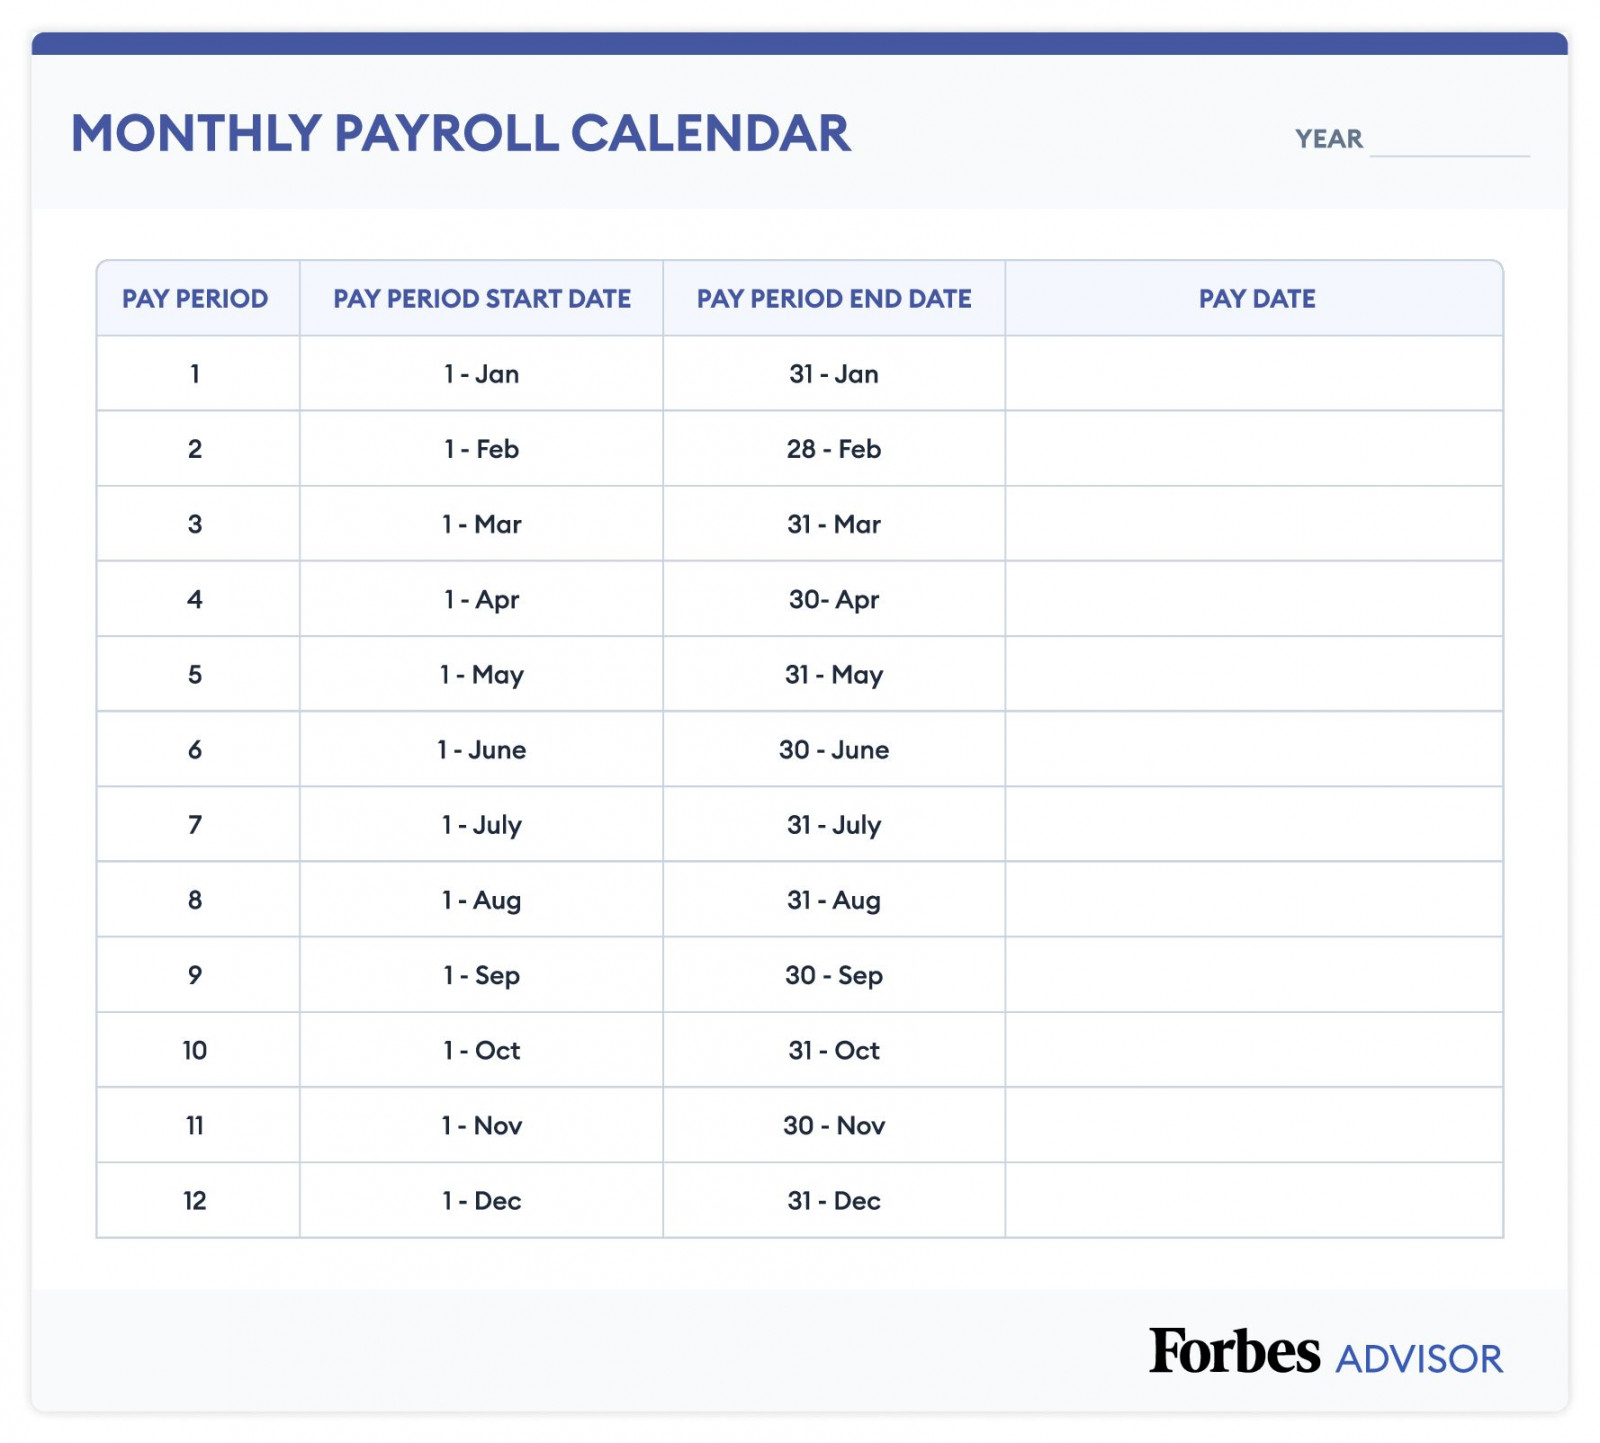 Payroll Calendar: Weekly, Monthly, & More – Forbes Advisor